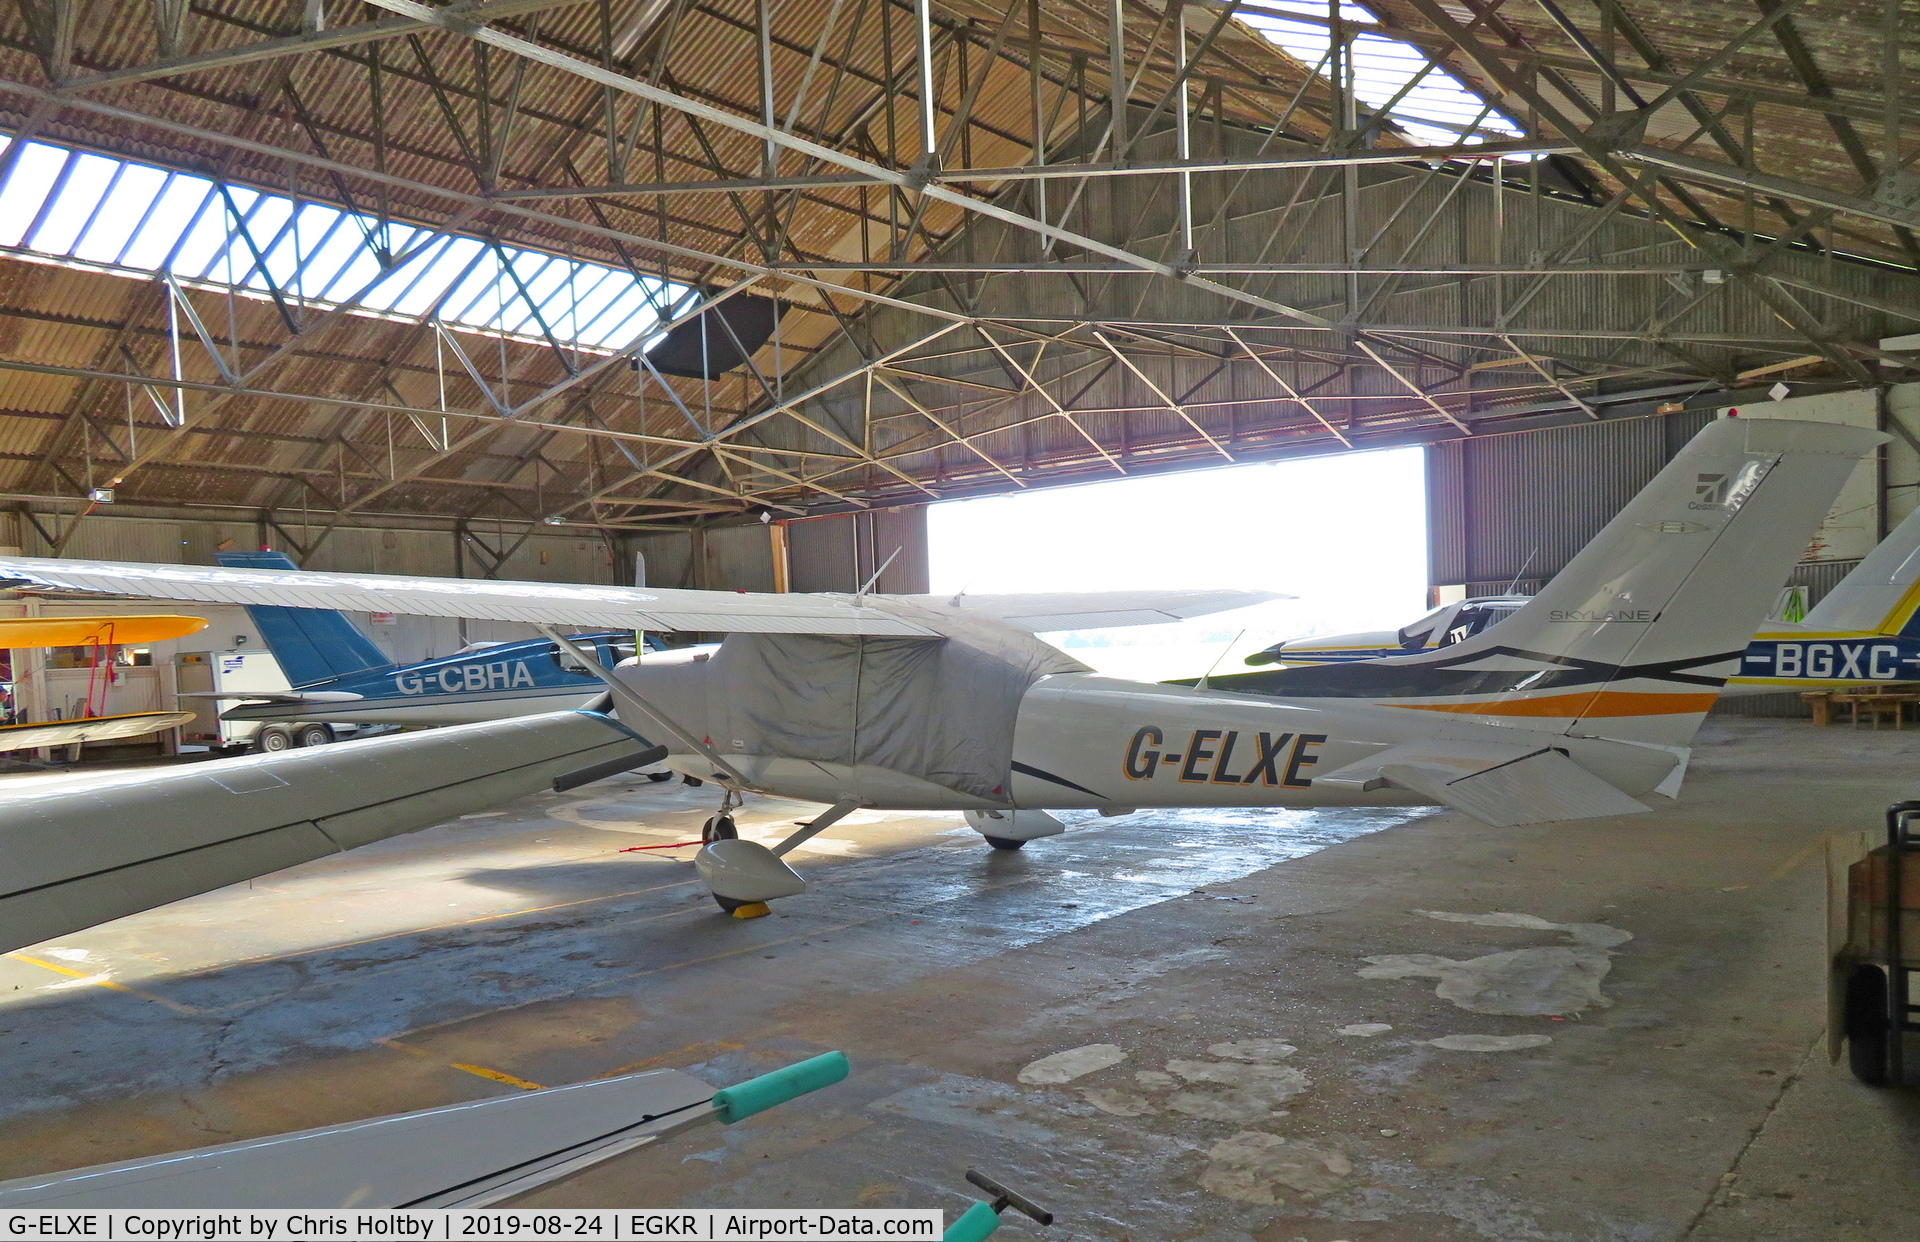 G-ELXE, 2007 Cessna 182T Skylane C/N 18281909, Hangared & covered at Redhill now privately owned in East Sussex